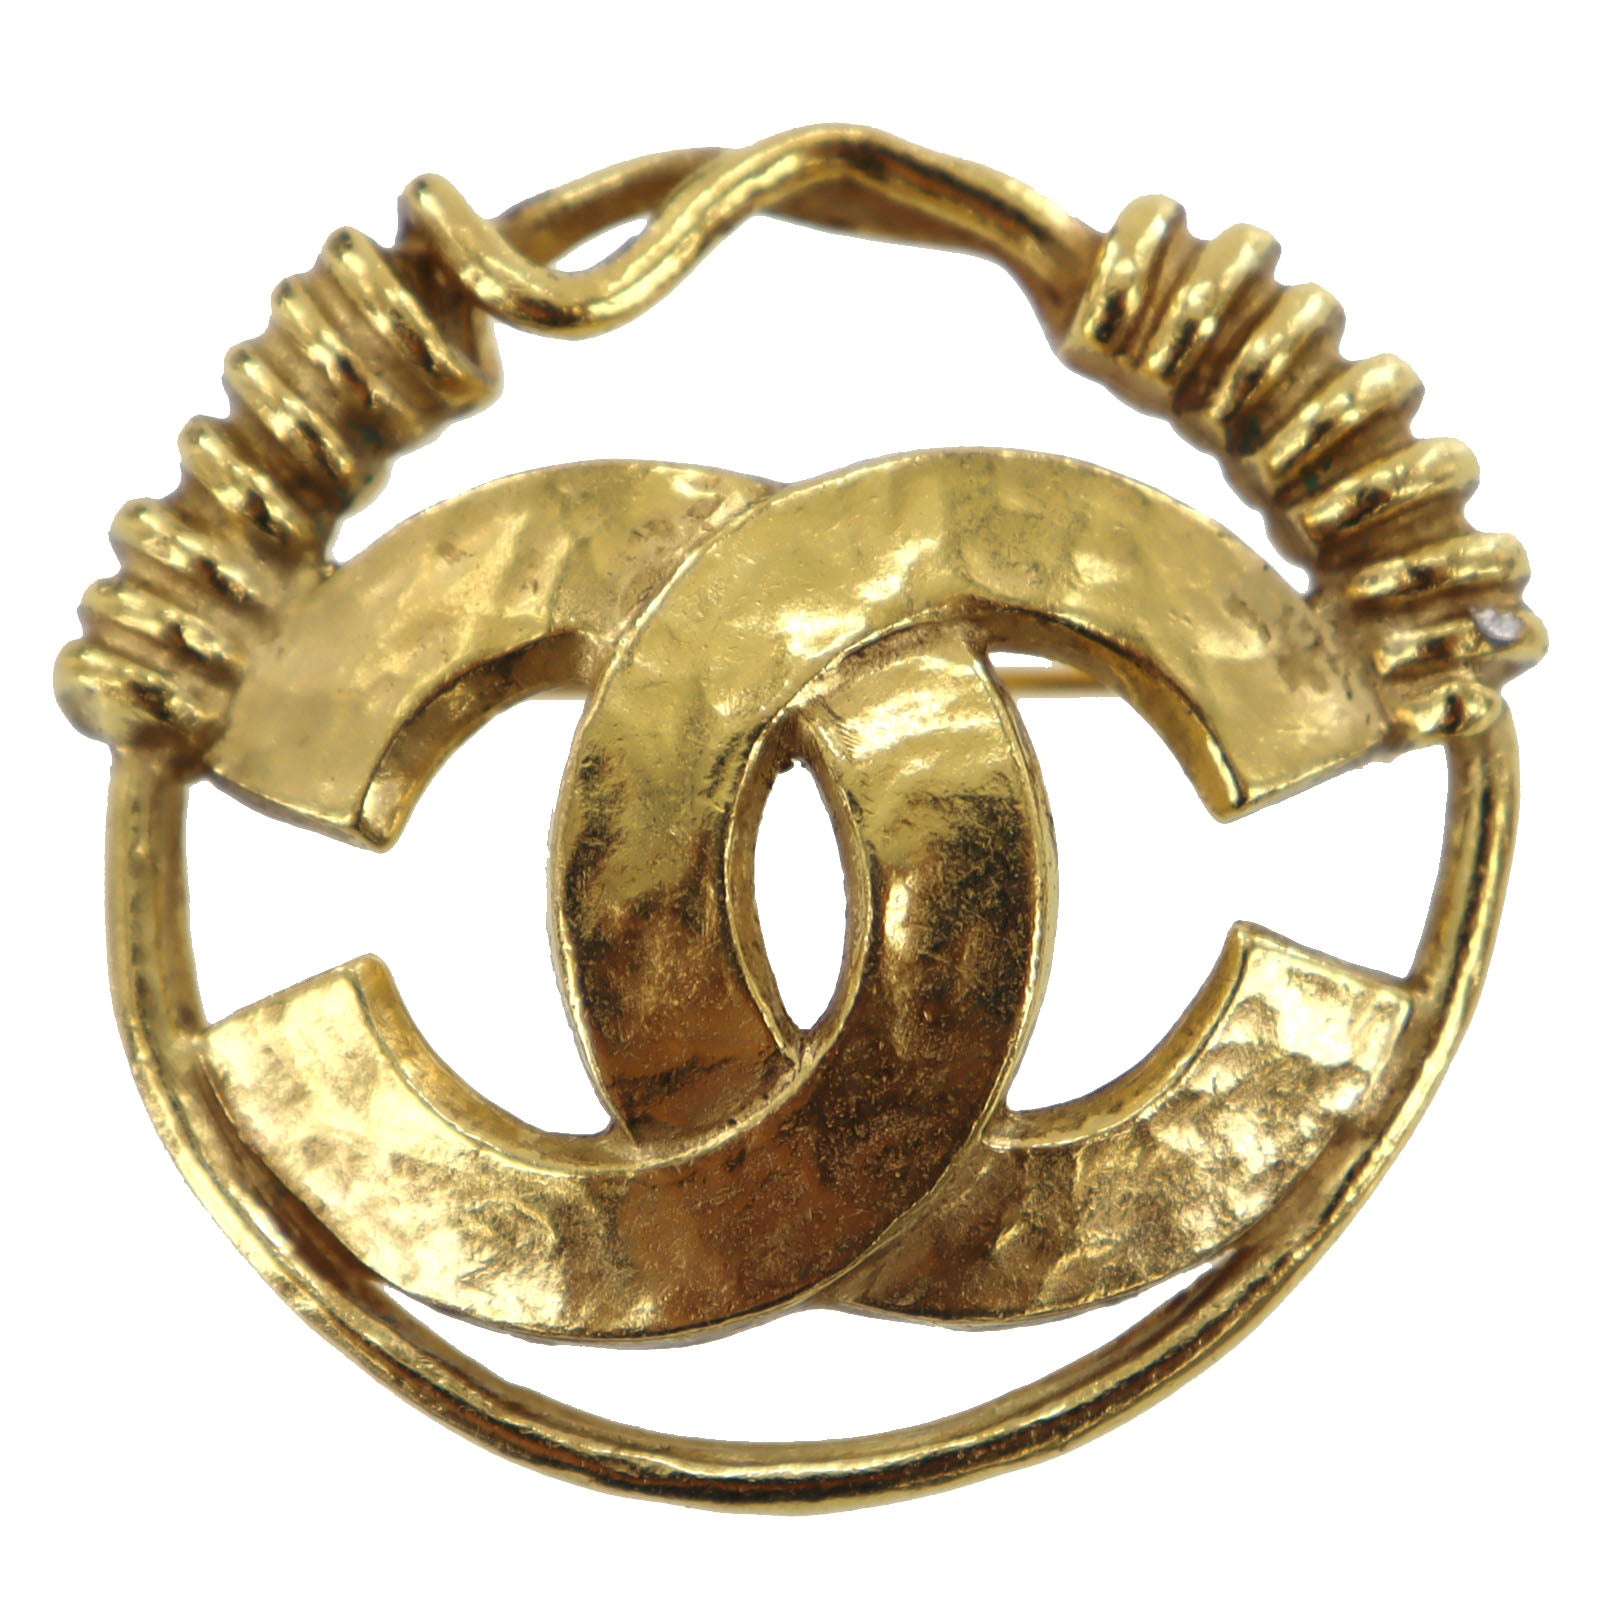 Auth CHANEL Vintage CC Logos Mademoiselle Brooch Pin Gold-Tone France  B22234